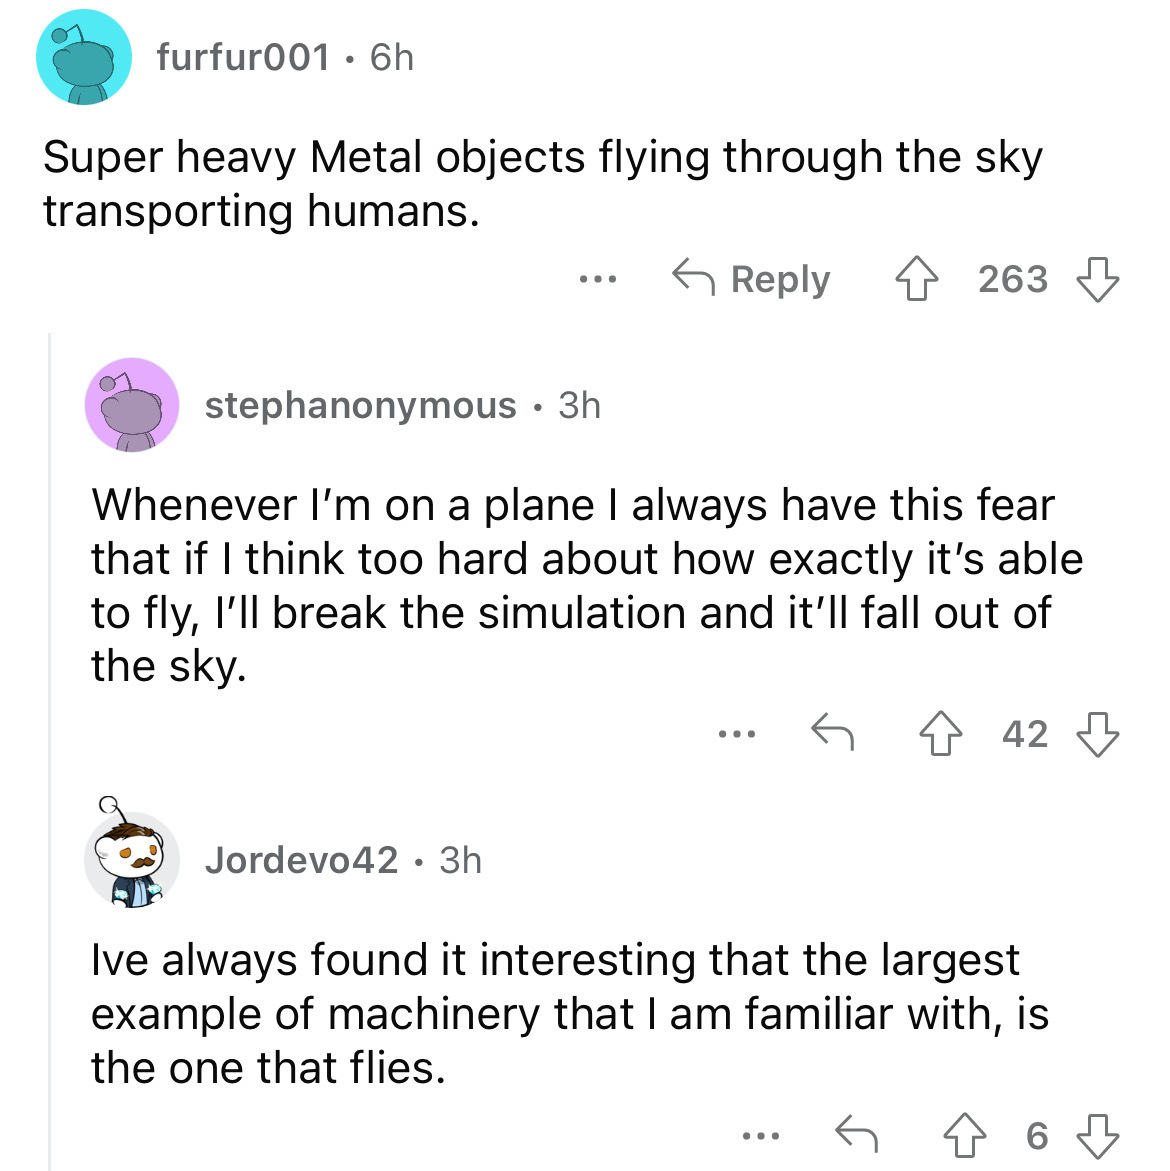 angle - furfur001 6h Super heavy Metal objects flying through the sky transporting humans. stephanonymous 3h ... Jordevo42 3h Whenever I'm on a plane I always have this fear that if I think too hard about how exactly it's able to fly, I'll break the simul